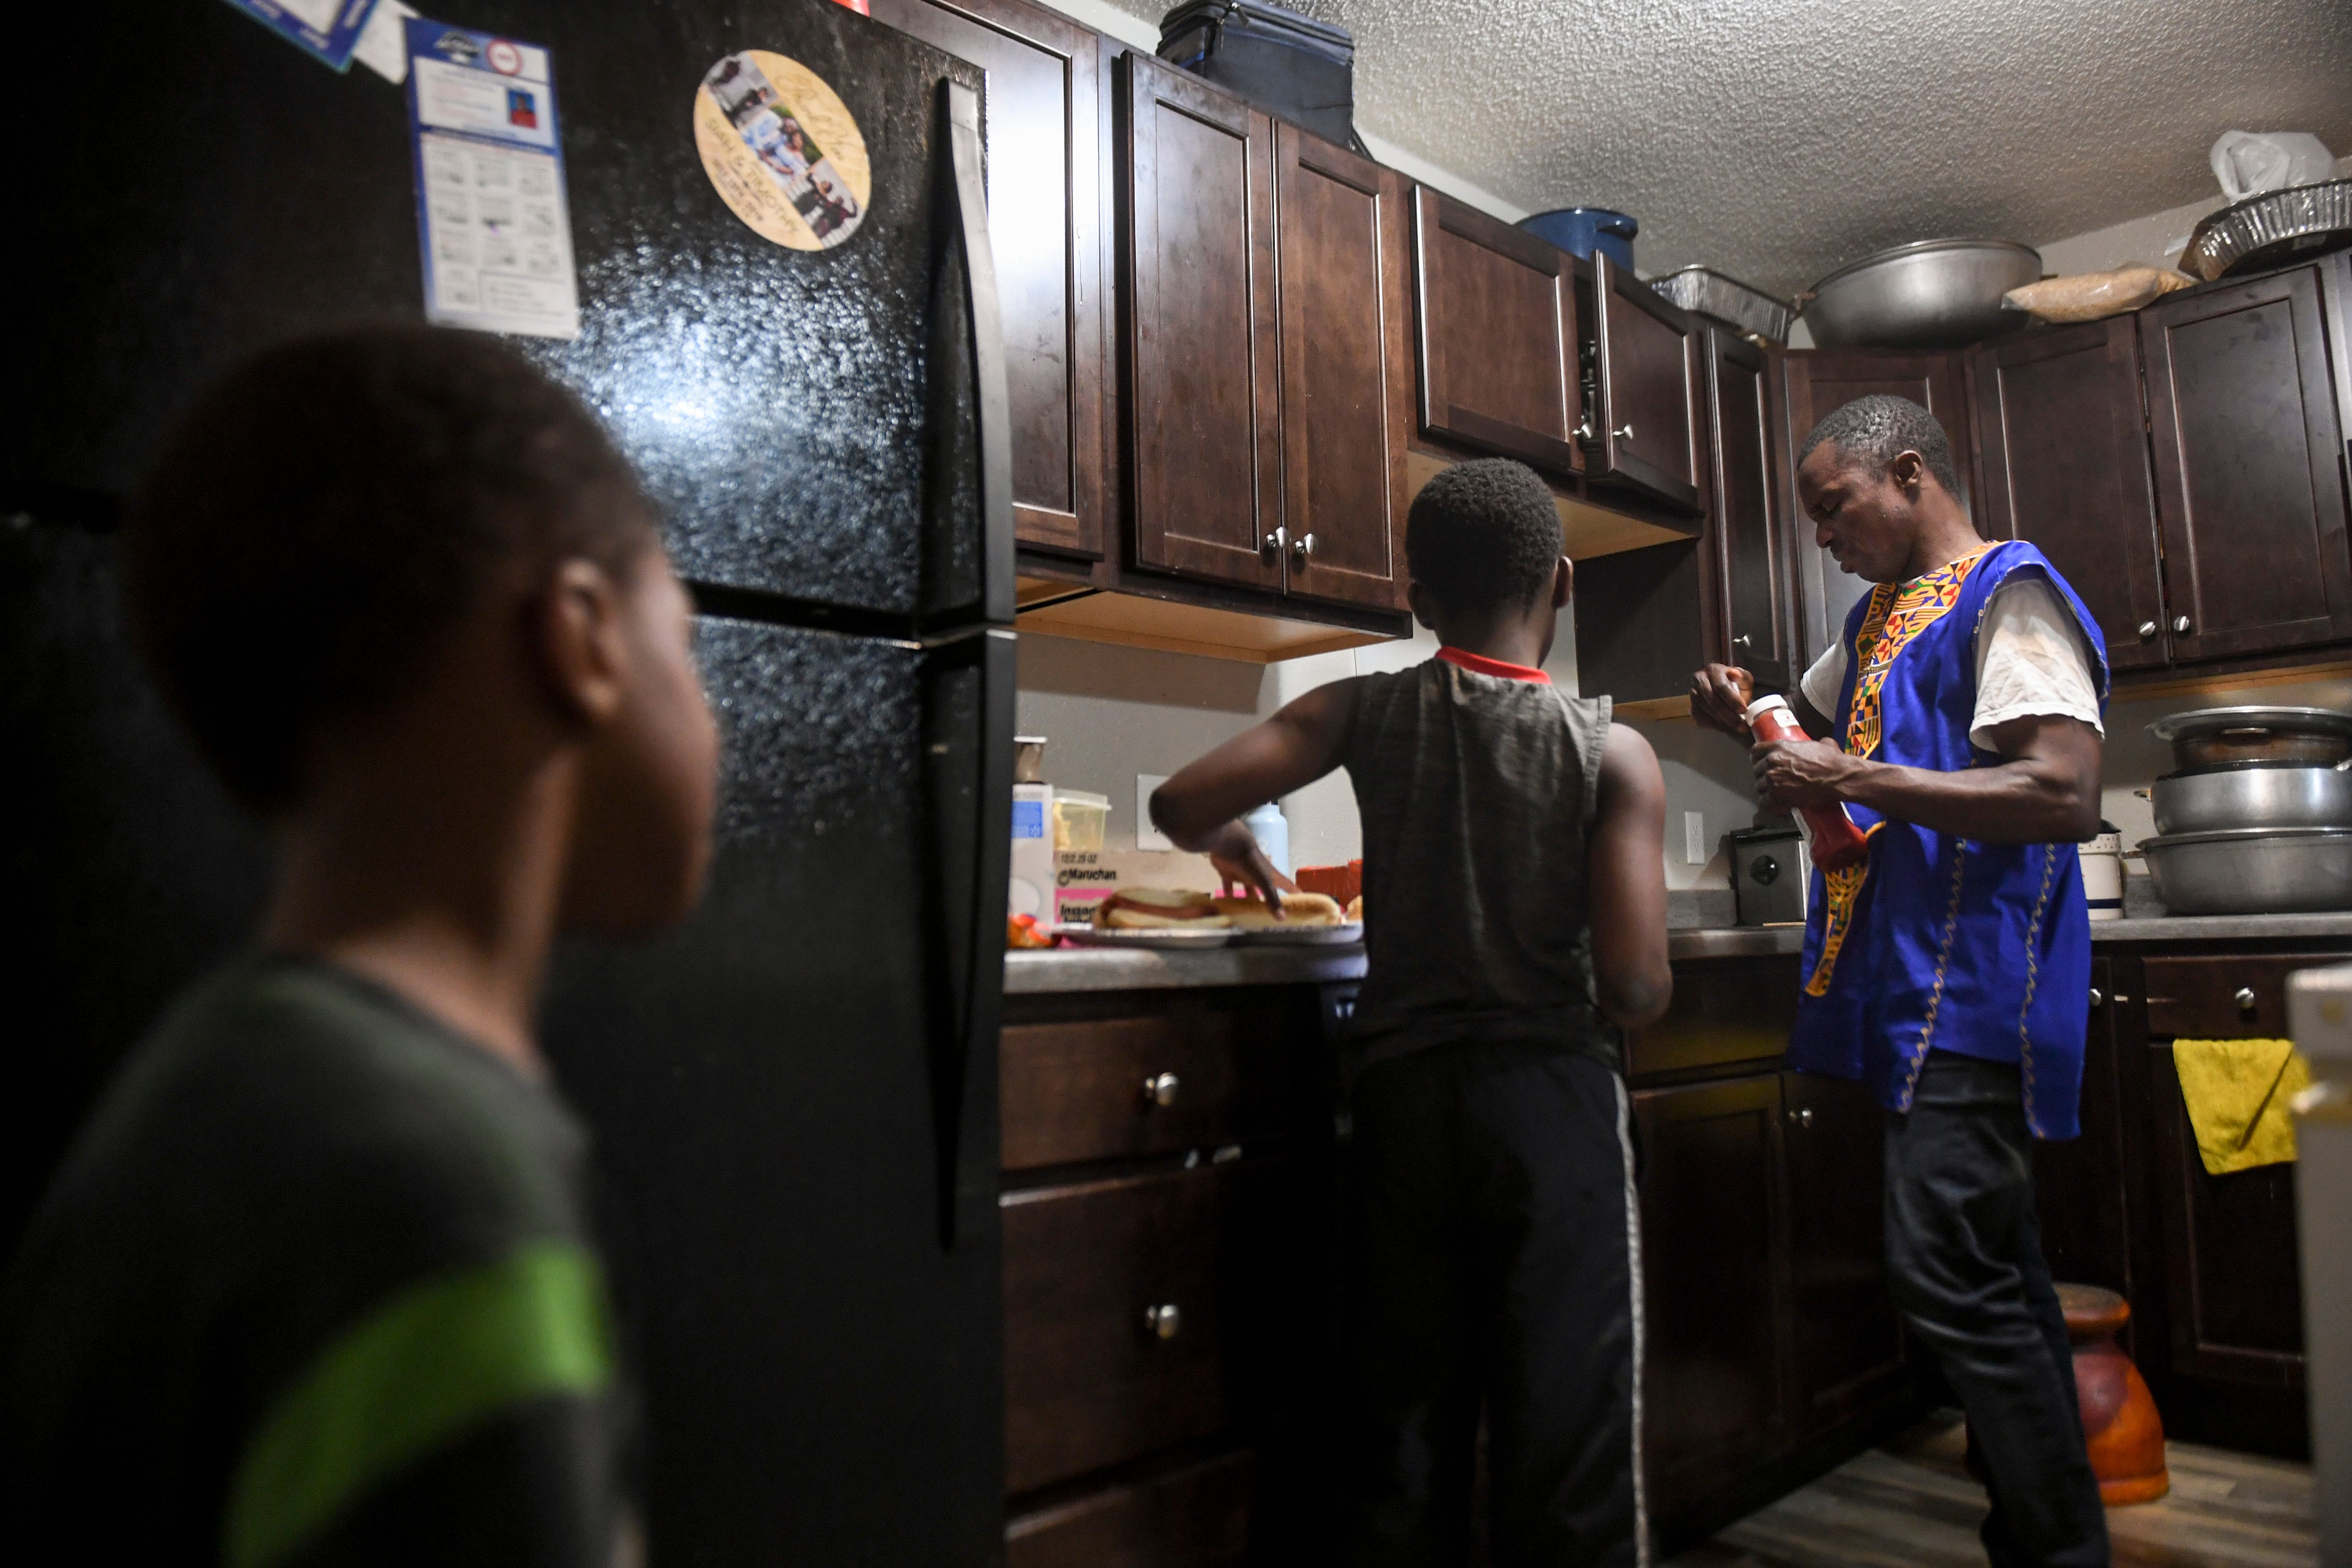 John Deranamie cooks dinner for his sons, Shadrach Cole, 4, and Joel Cole, 9, on Wednesday, April 29, 2020 at his home in Sioux Falls, S.D.